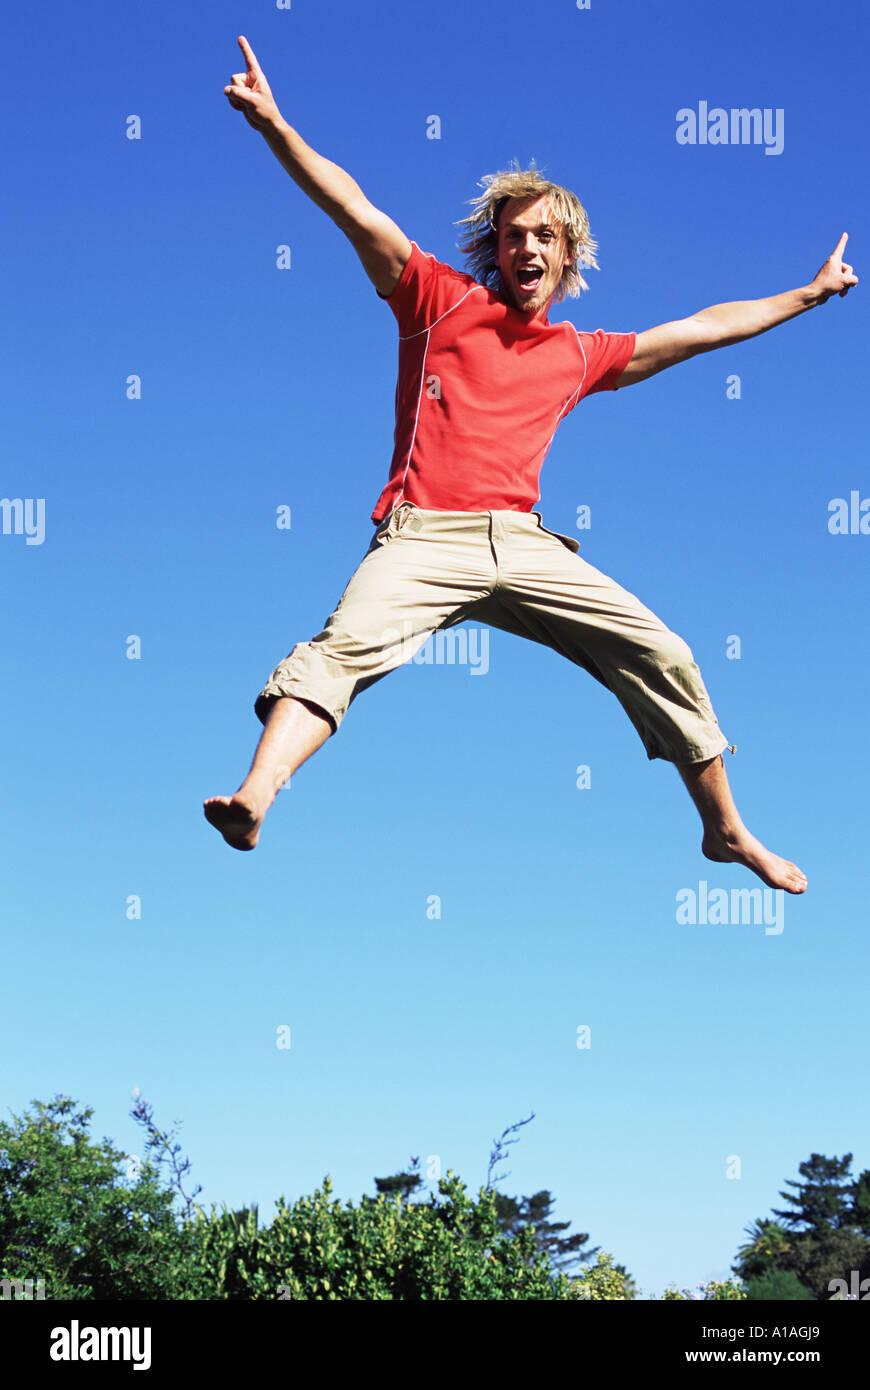 Young man jumping Stock Photo - Alamy